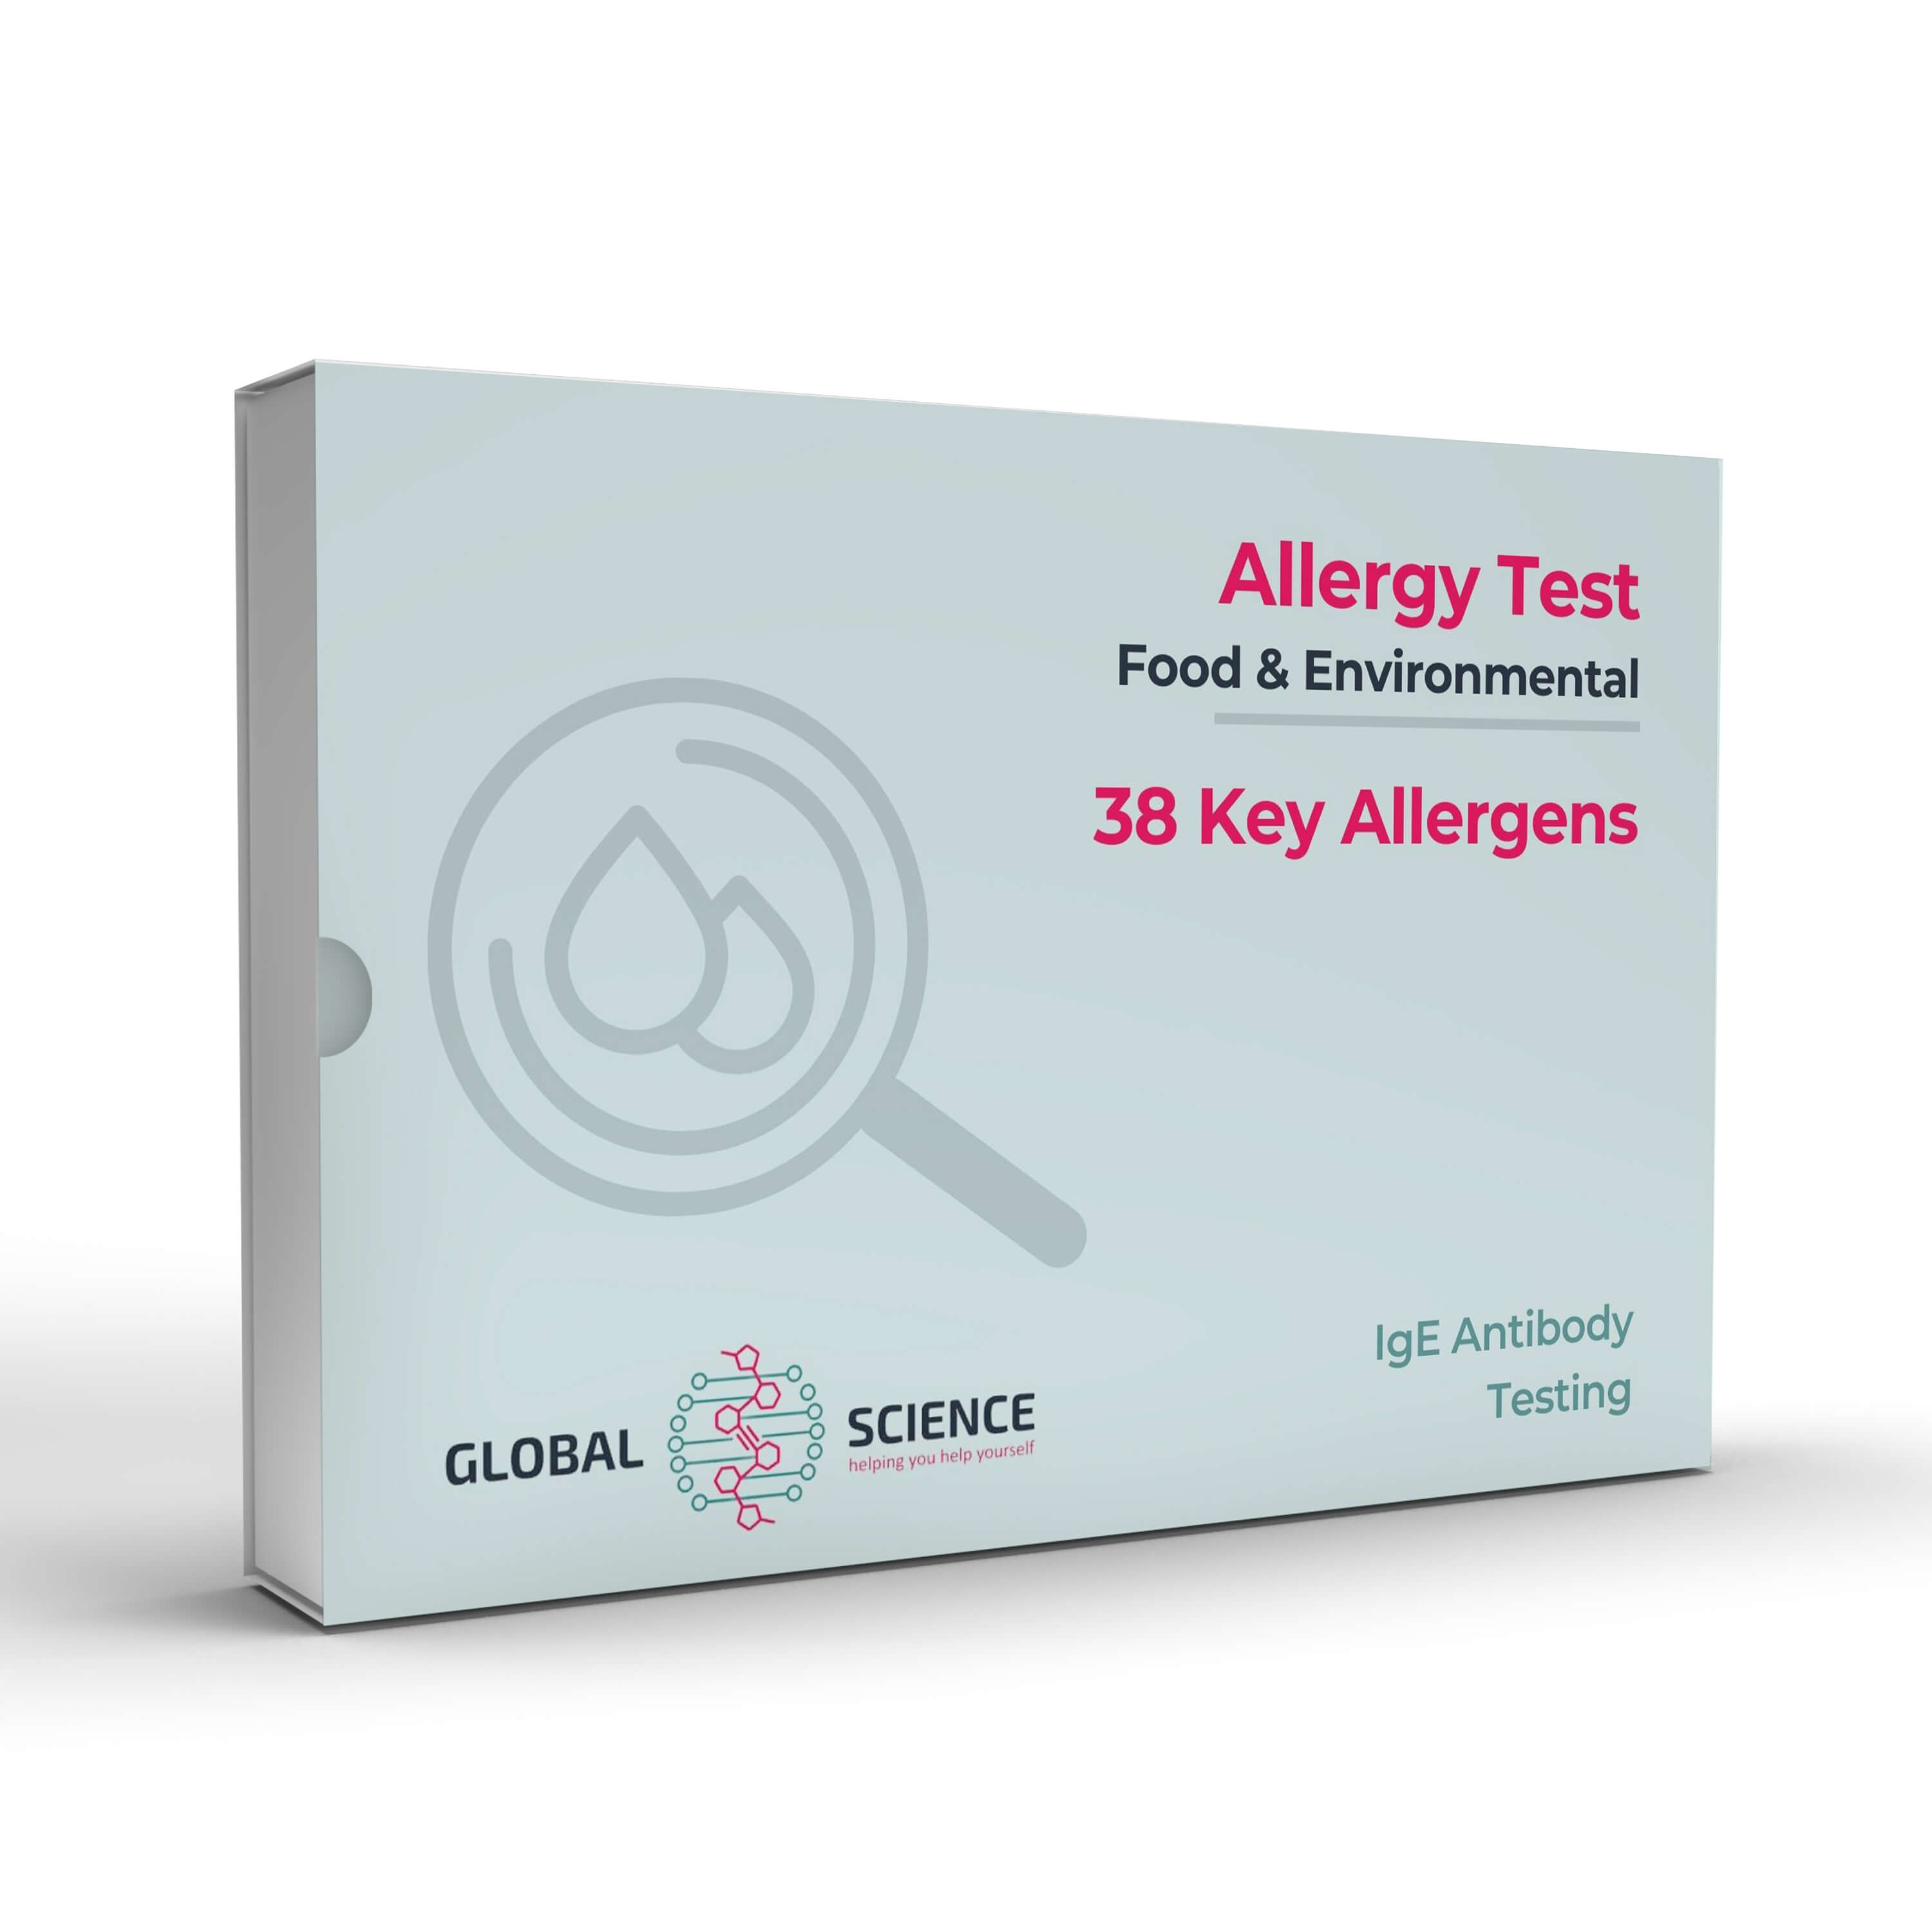 Allergy 38 Kit Mock up - Elimination diet following an allergy or intolerance test